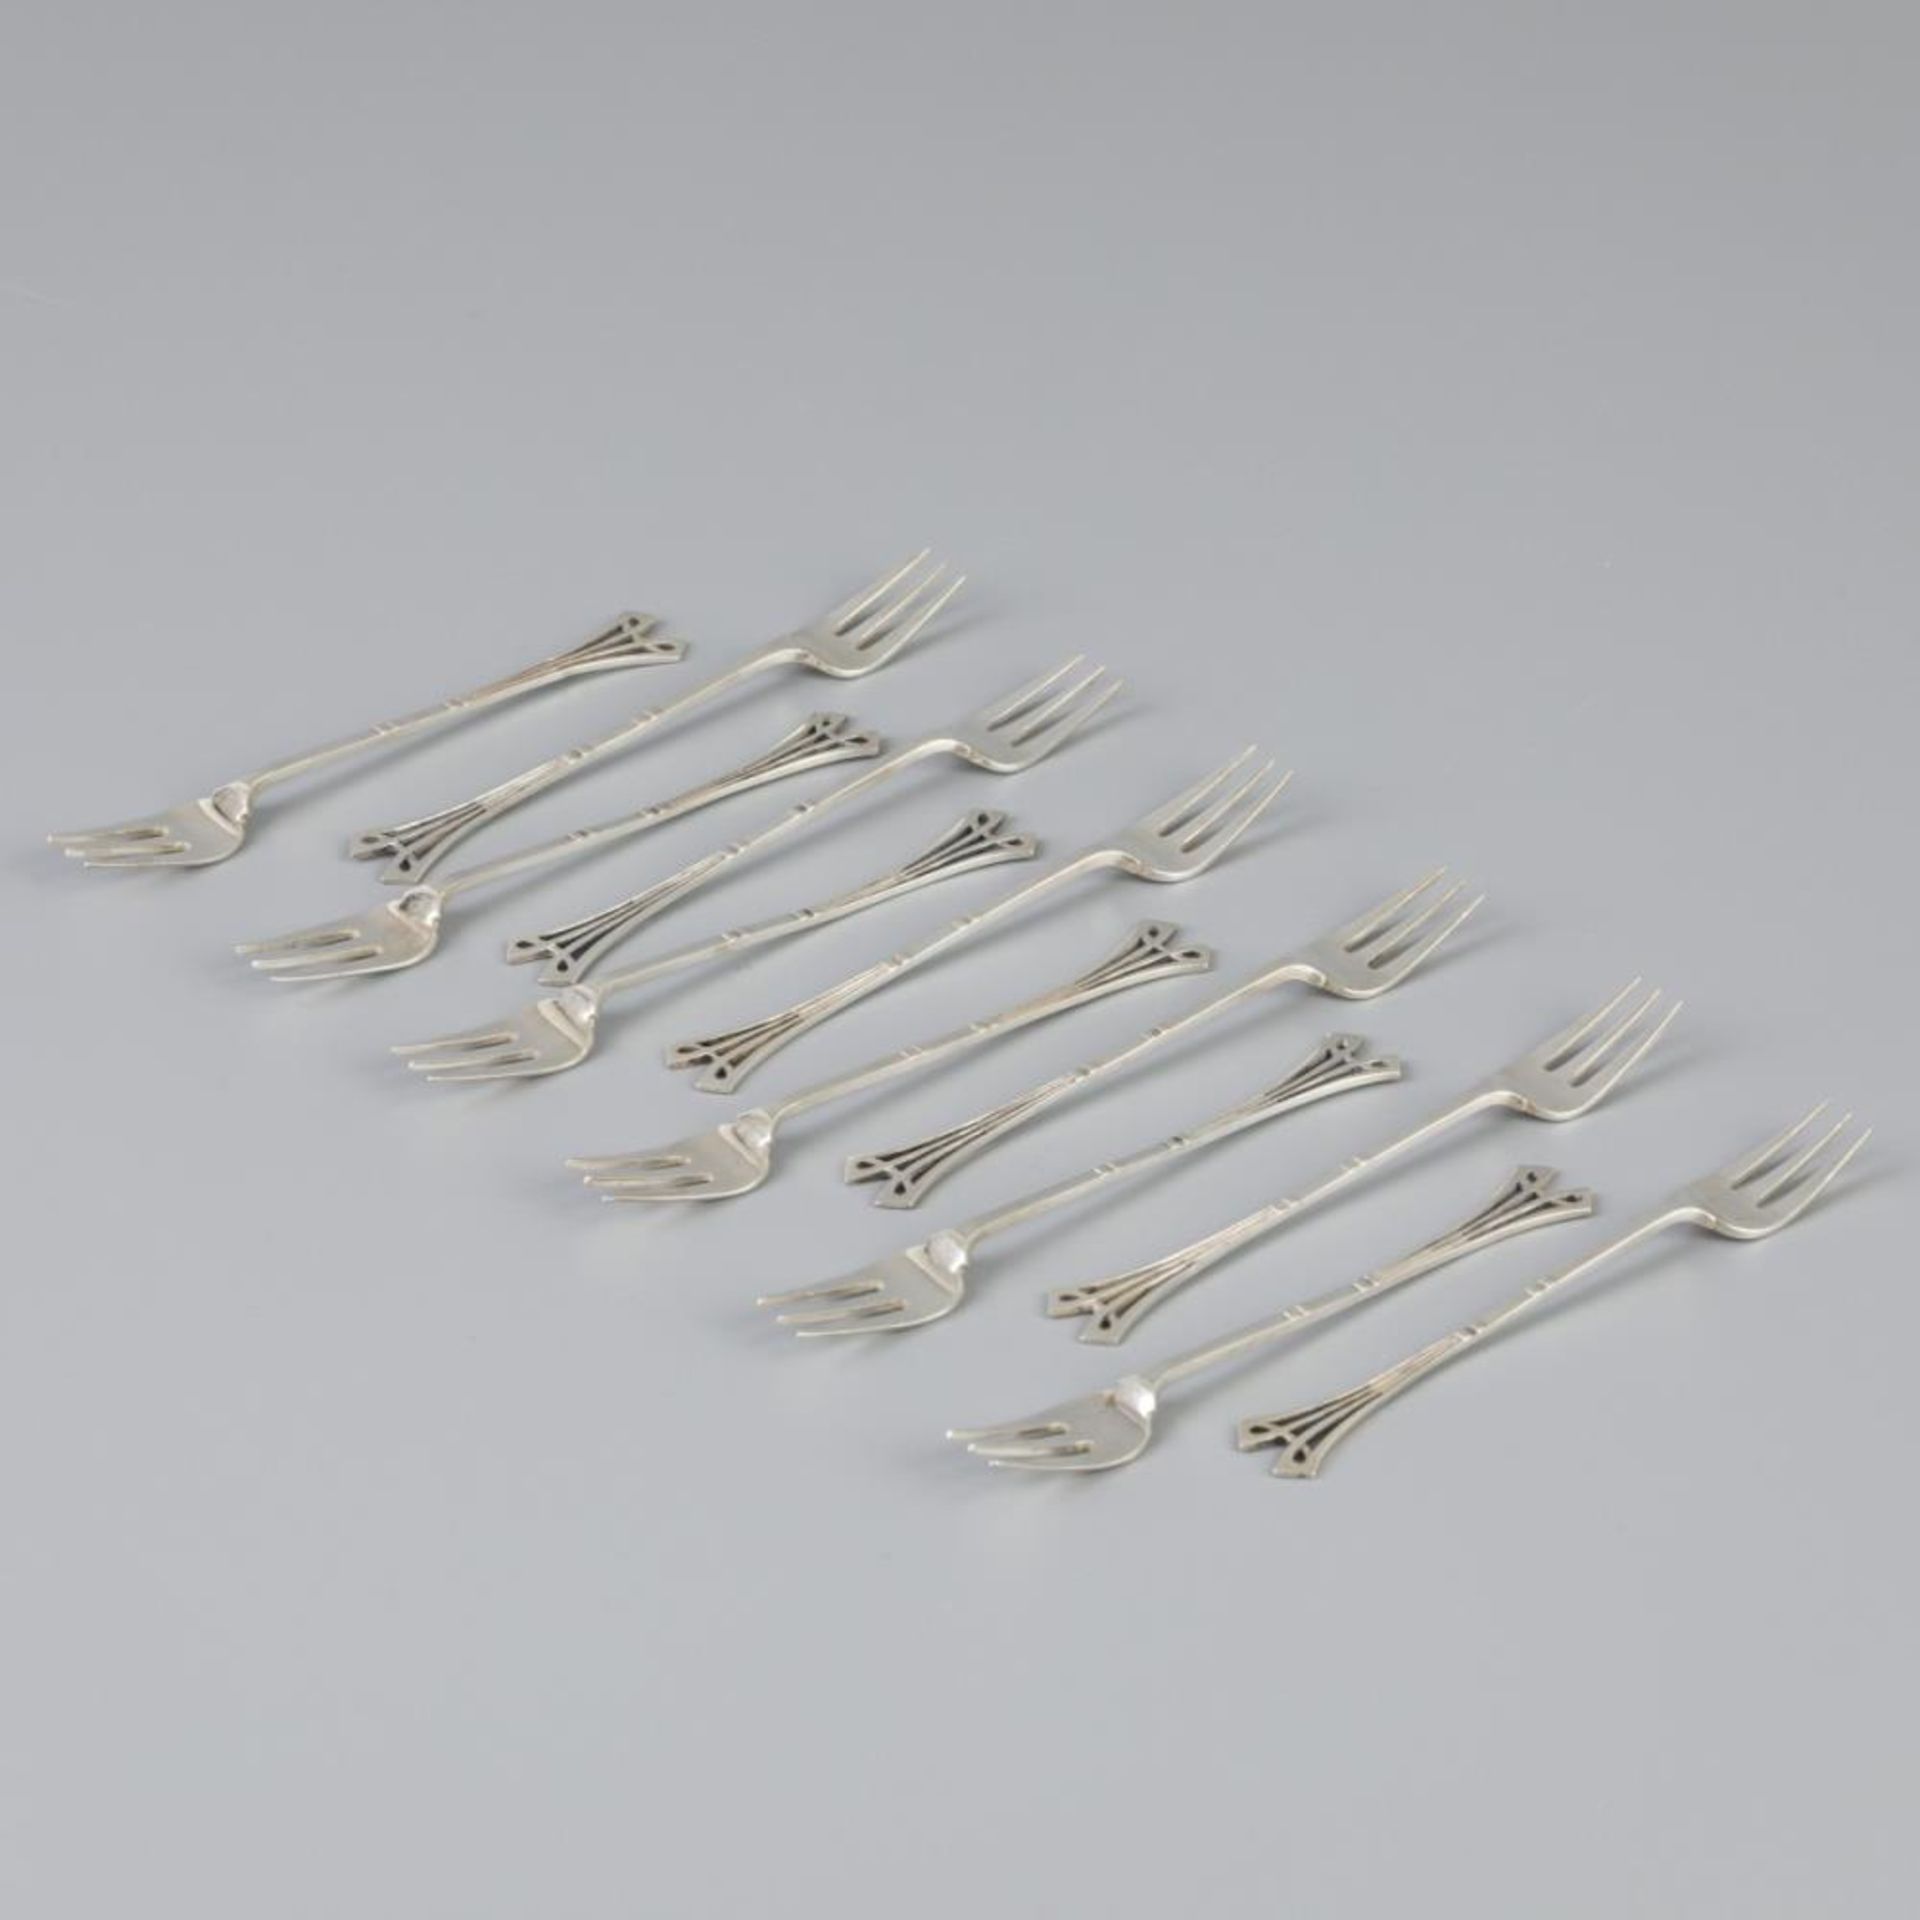 12 piece set silver pastry forks.